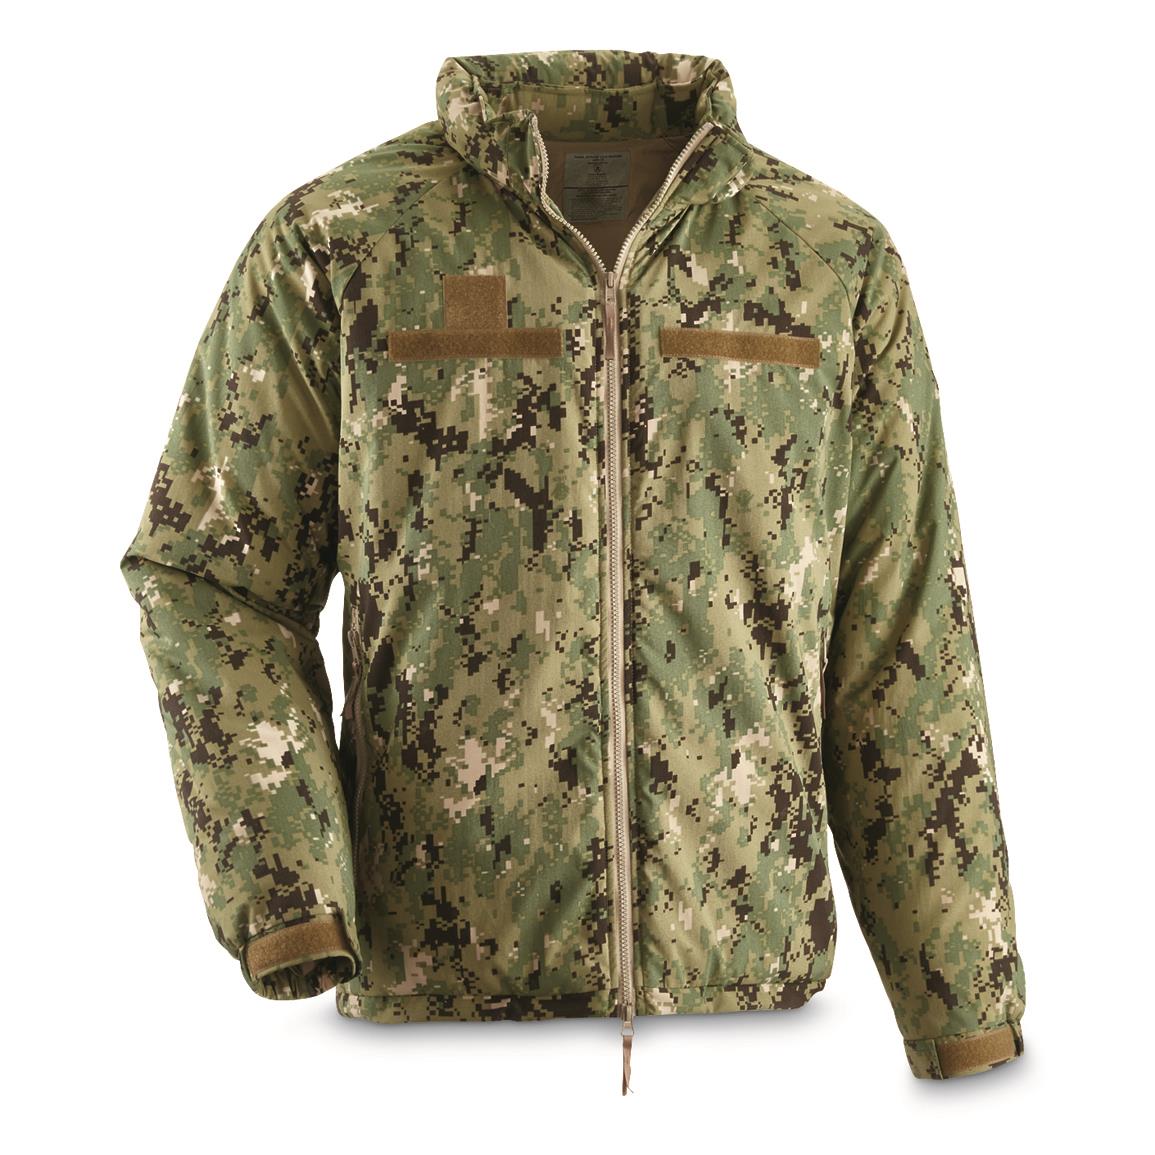 Brooklyn Armed Forces ECWCS Level 7 Primaloft Jacket - 718436, Tactical  Jackets  Outerwear at Sportsman's Guide